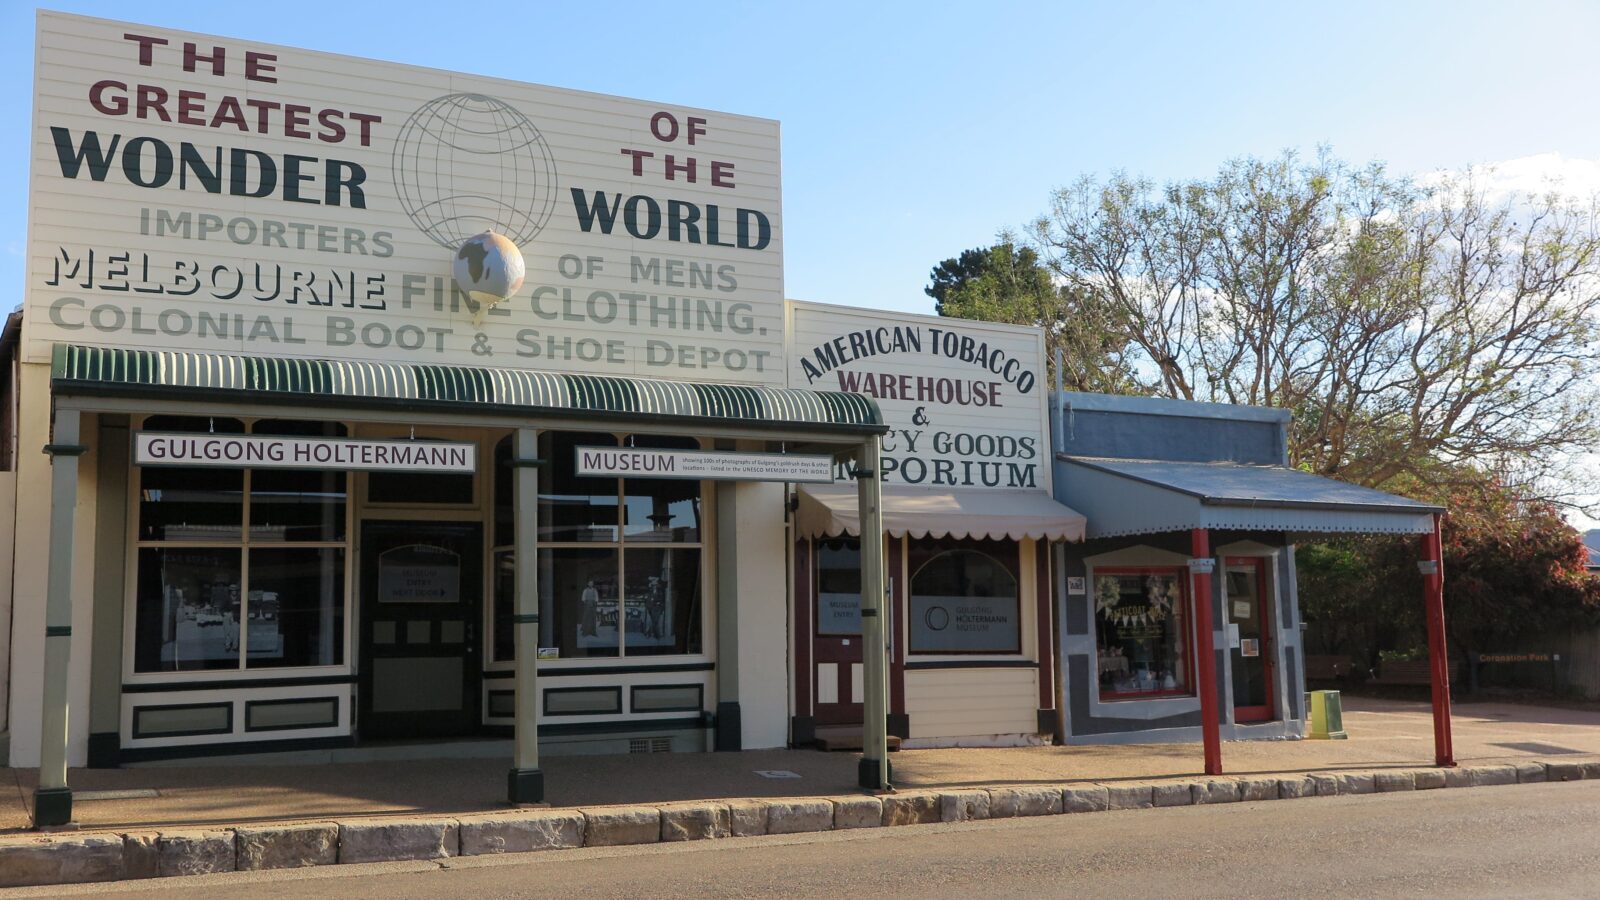 Gulgong Holtermann Museum renovated State Heritage listed buildings